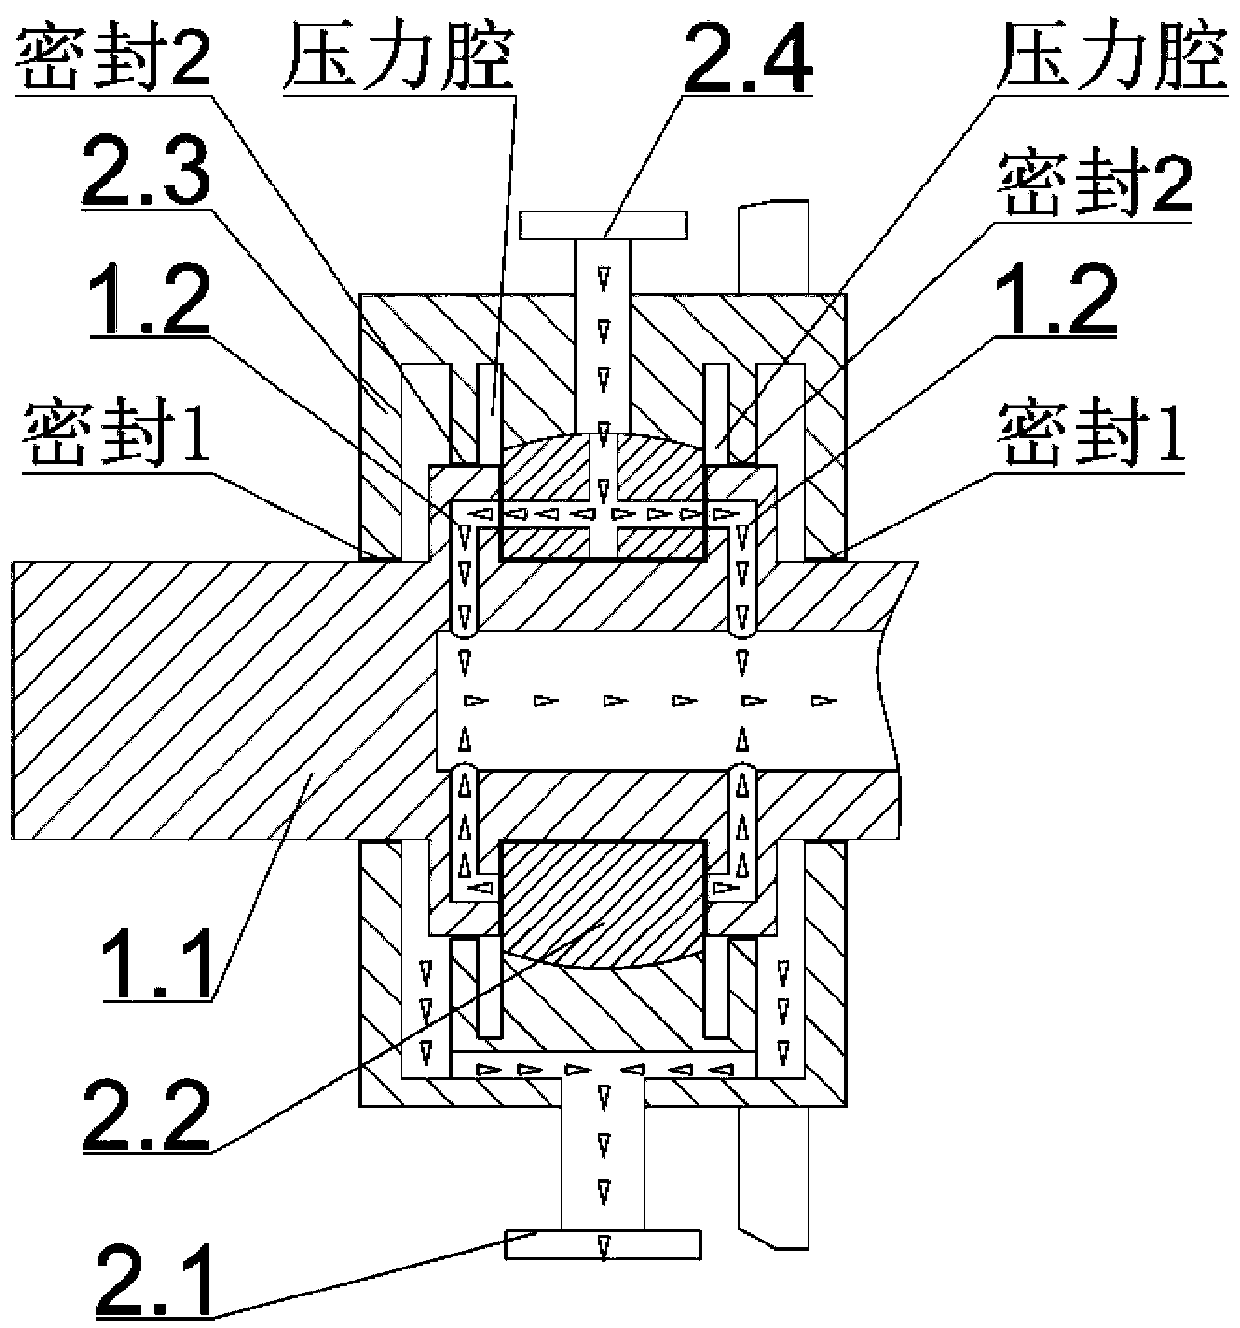 Rotor oil-cooled permanent magnet motor